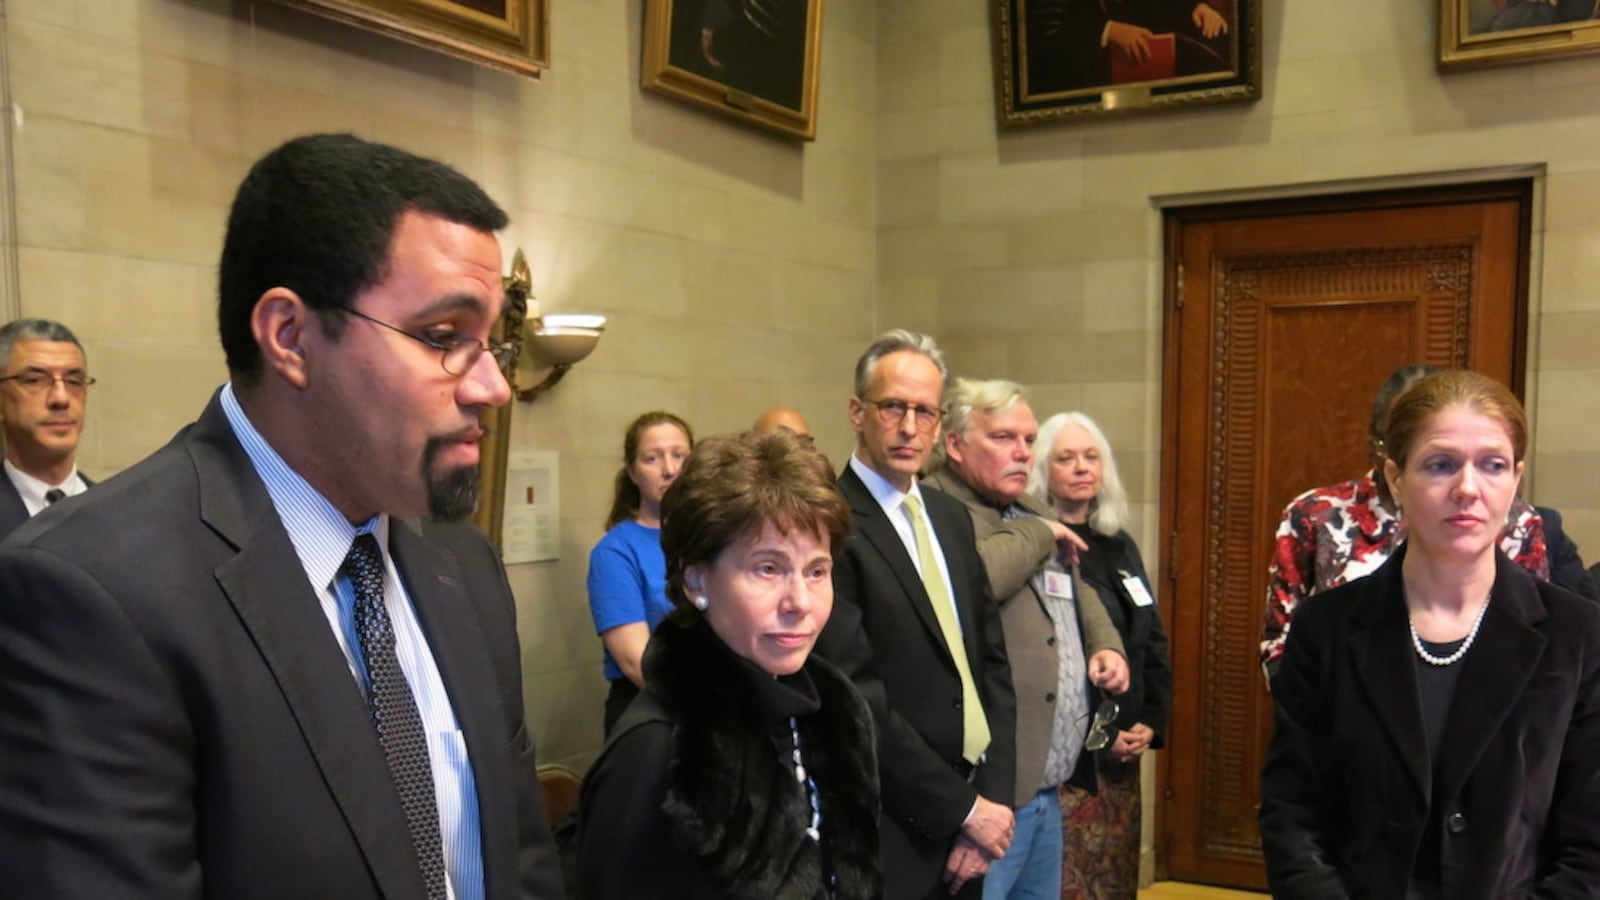 Former commissioner John King and Chancellor Merryl Tisch stand with Beth Berlin, right.